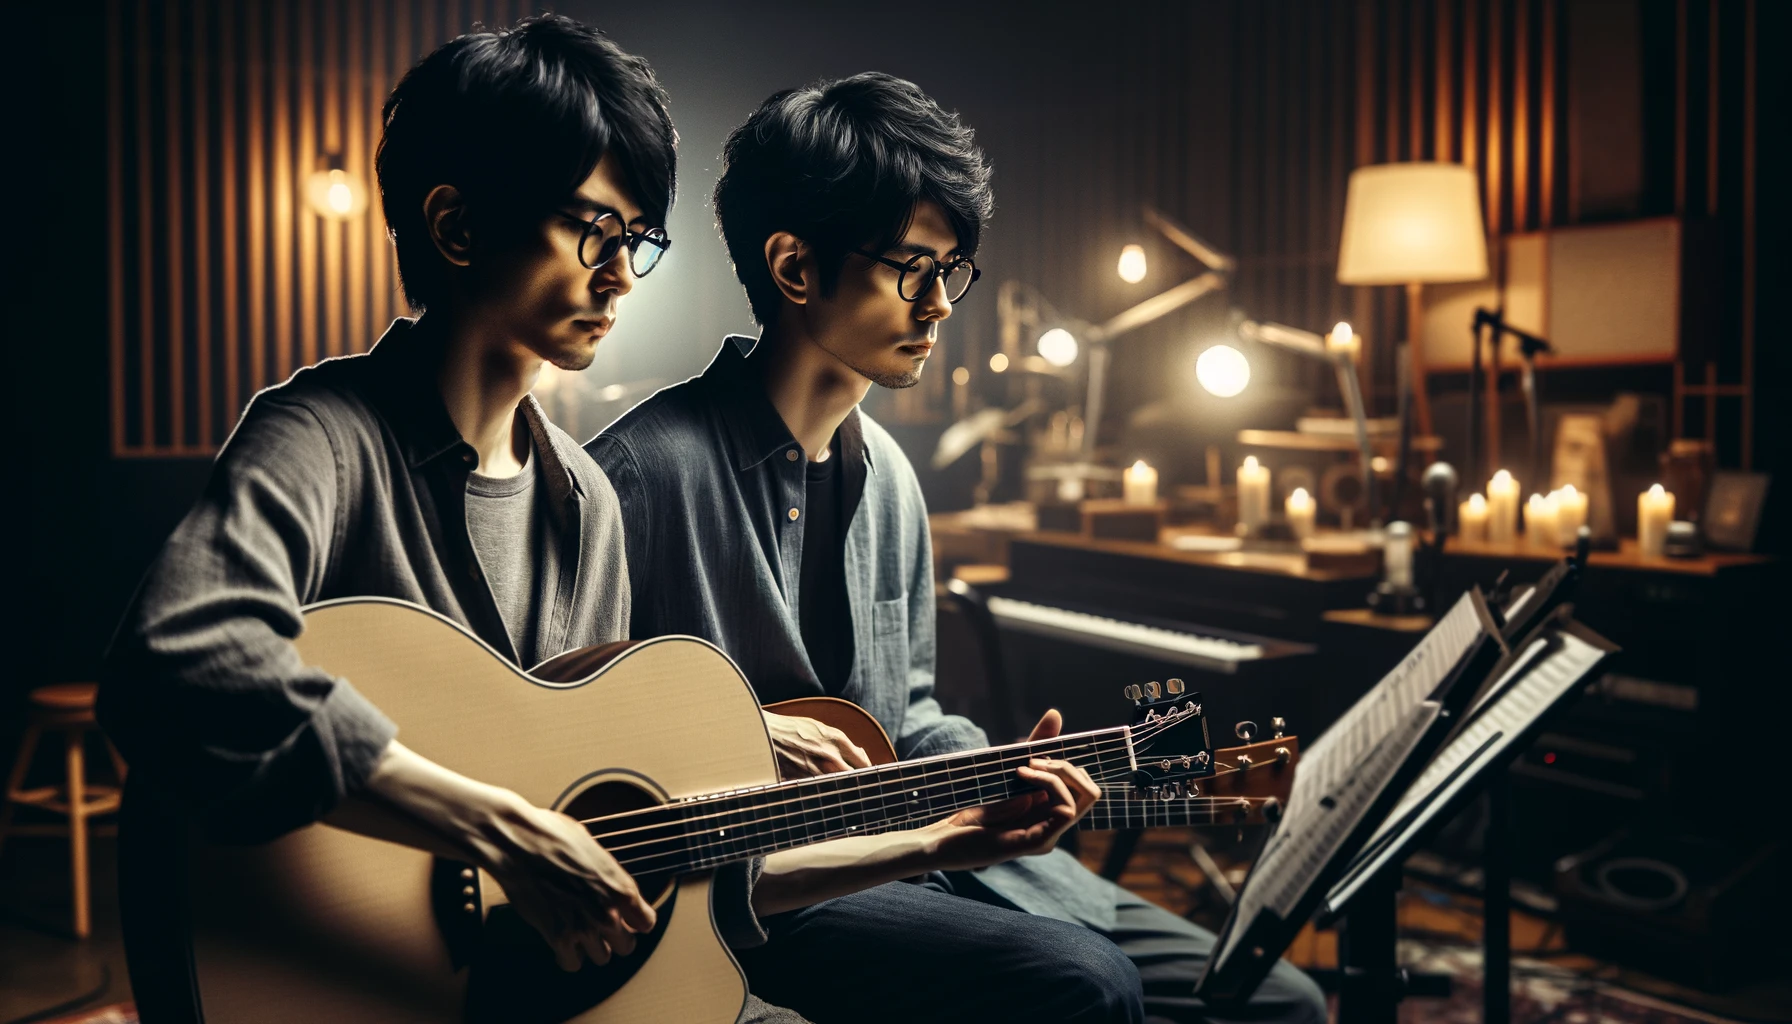 A band of two Japanese brothers in their 30s, both wearing glasses, providing melancholic, unique music. They have short black hair and are depicted in a contemporary setting, holding musical instruments. The image is to capture a serene and introspective mood, set in a modern music studio with dim lighting and artistic decor, emphasizing the creative and emotional essence of their music. The scene should be in a 16:9 aspect ratio, with the brothers positioned in the center, engaging deeply with their music.